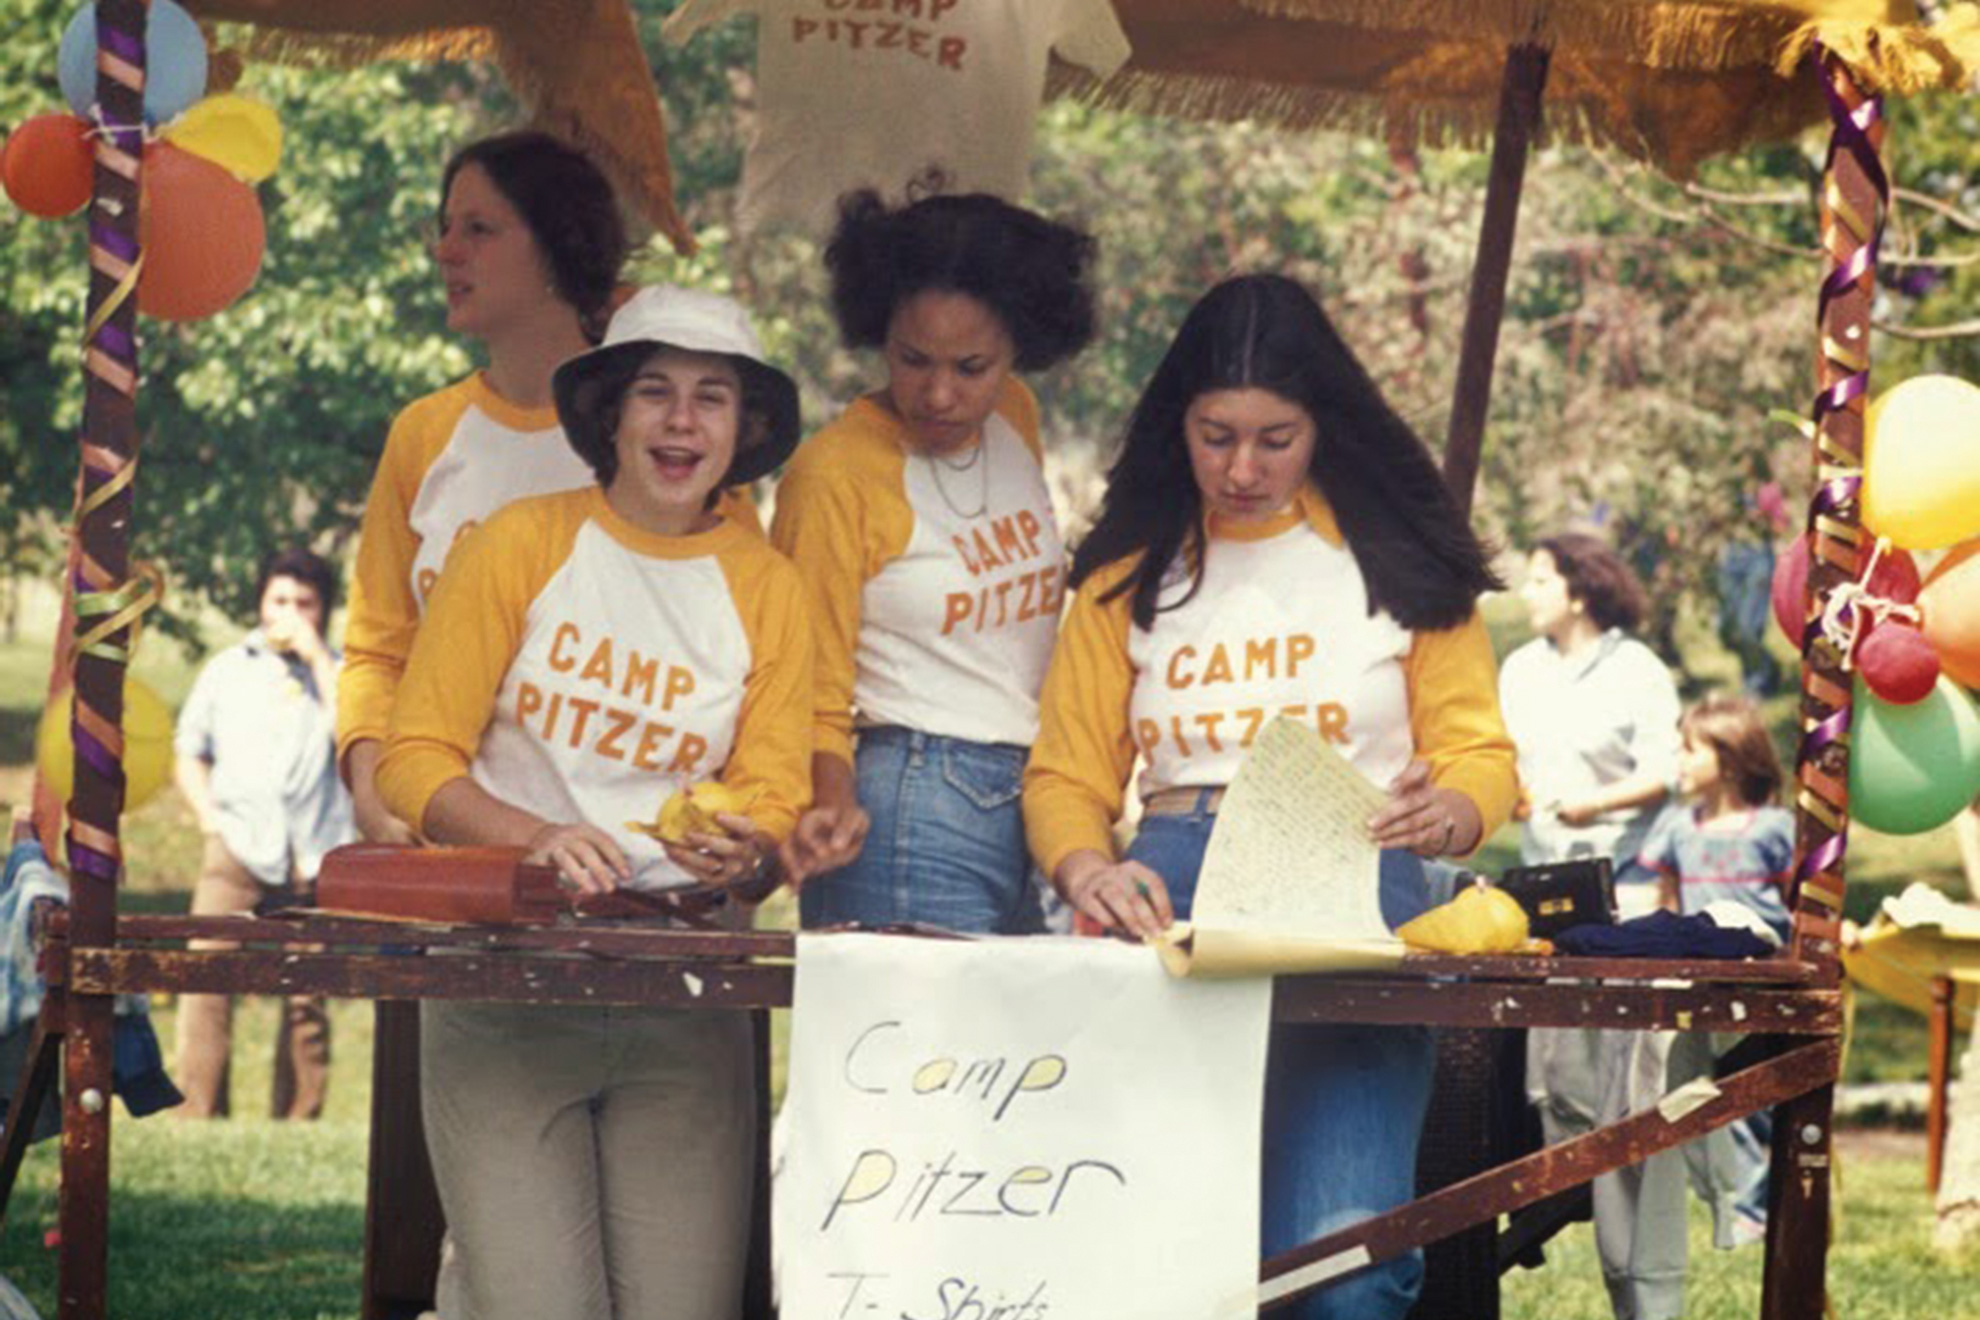 Student at Kohoutek 1976 with Camp Pitzer t-shirts